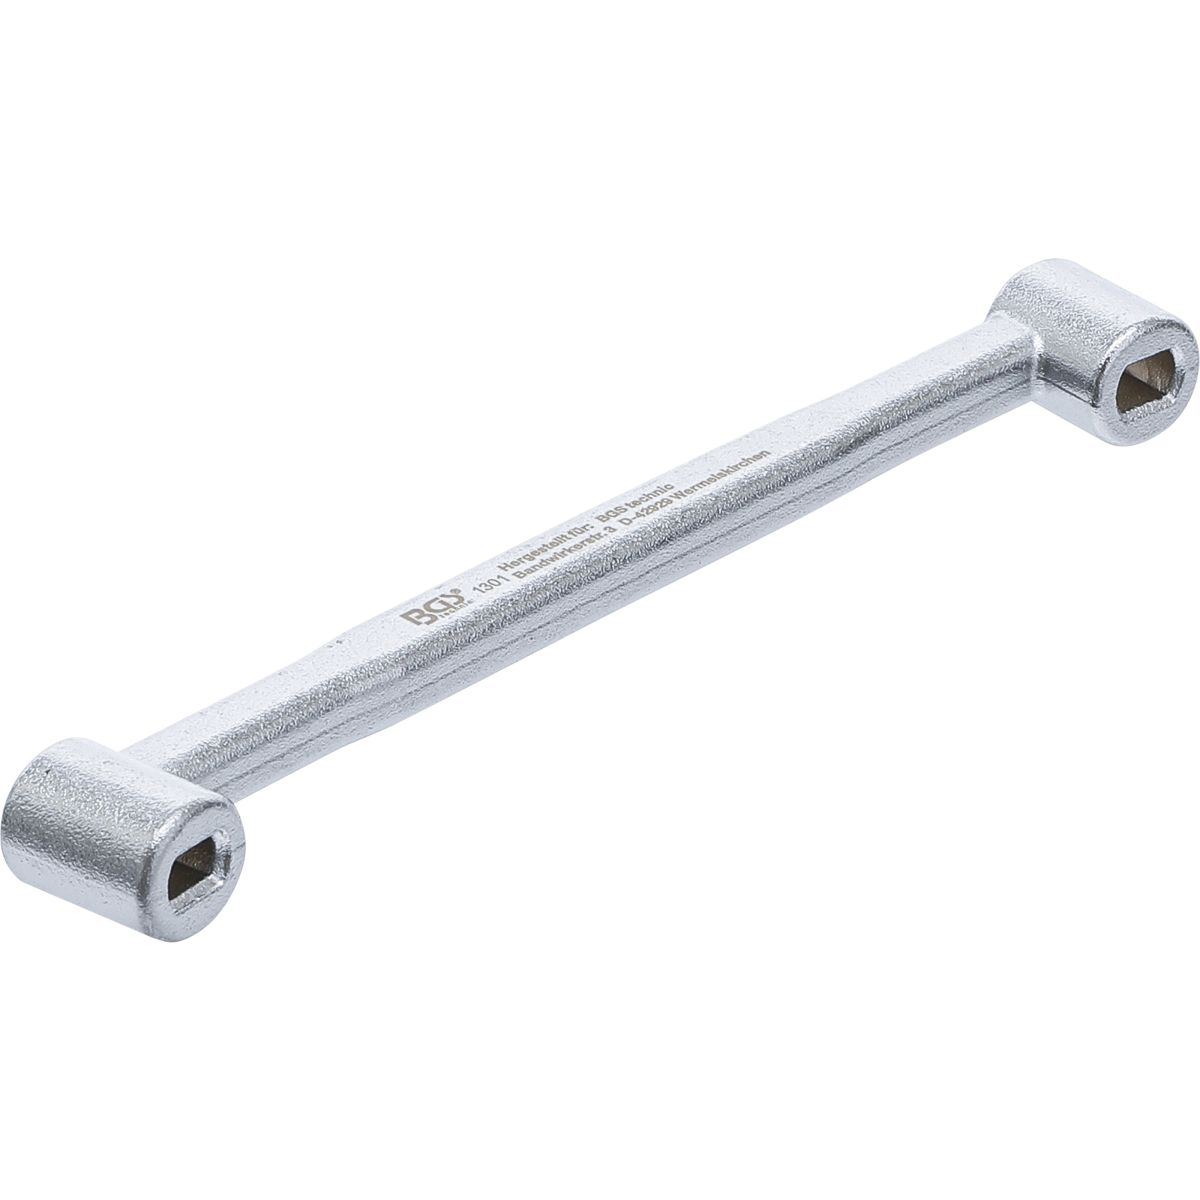 Shock Absorber Counter holding Wrench | for Shock Absorbers with Oval Pins